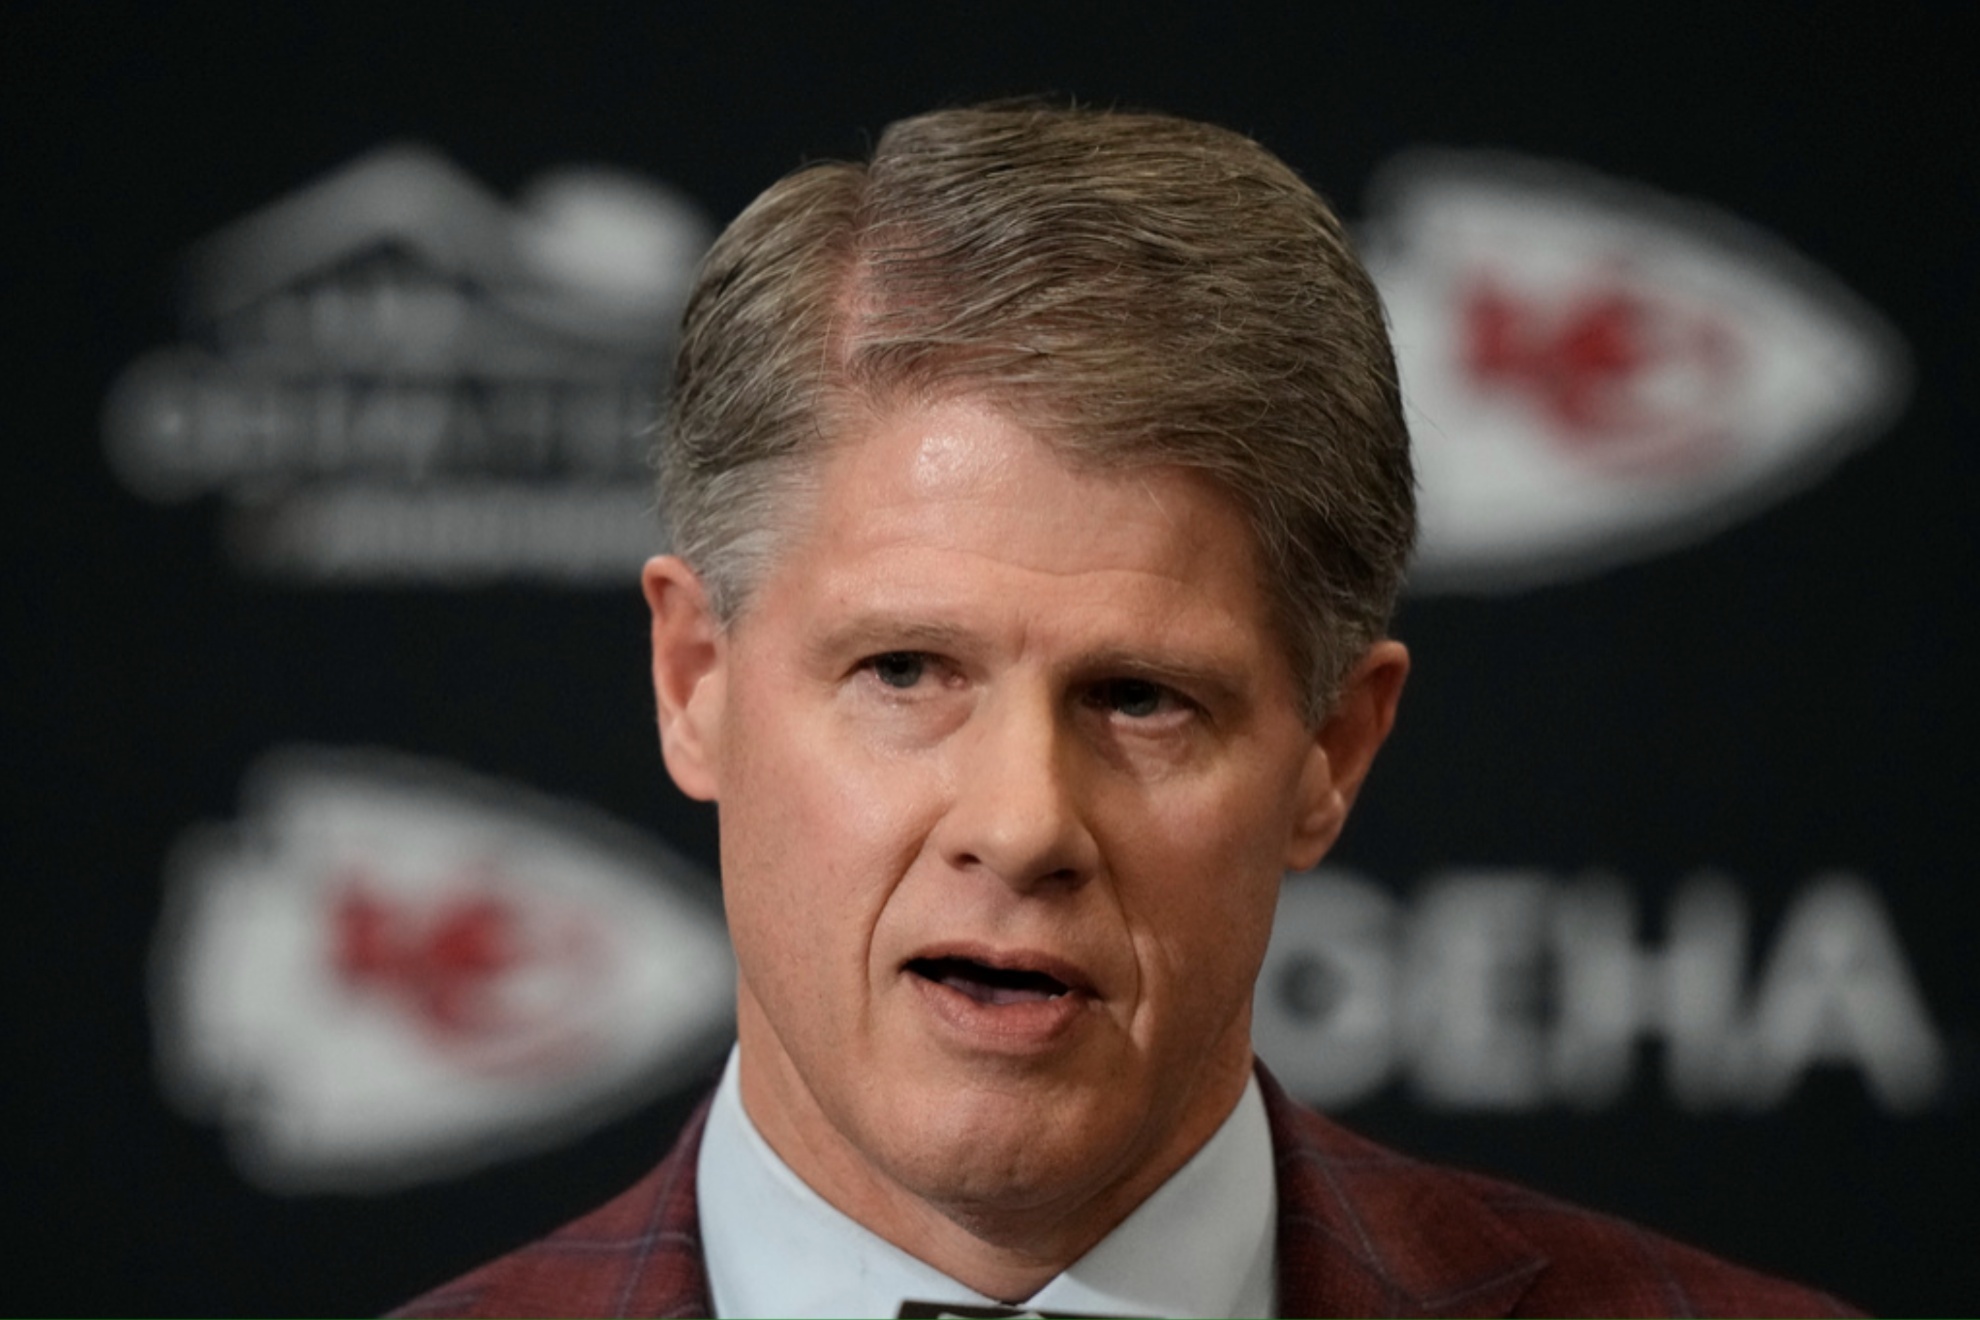 Chiefs owner, Clark Hunt, address his players comments about the teams facilities